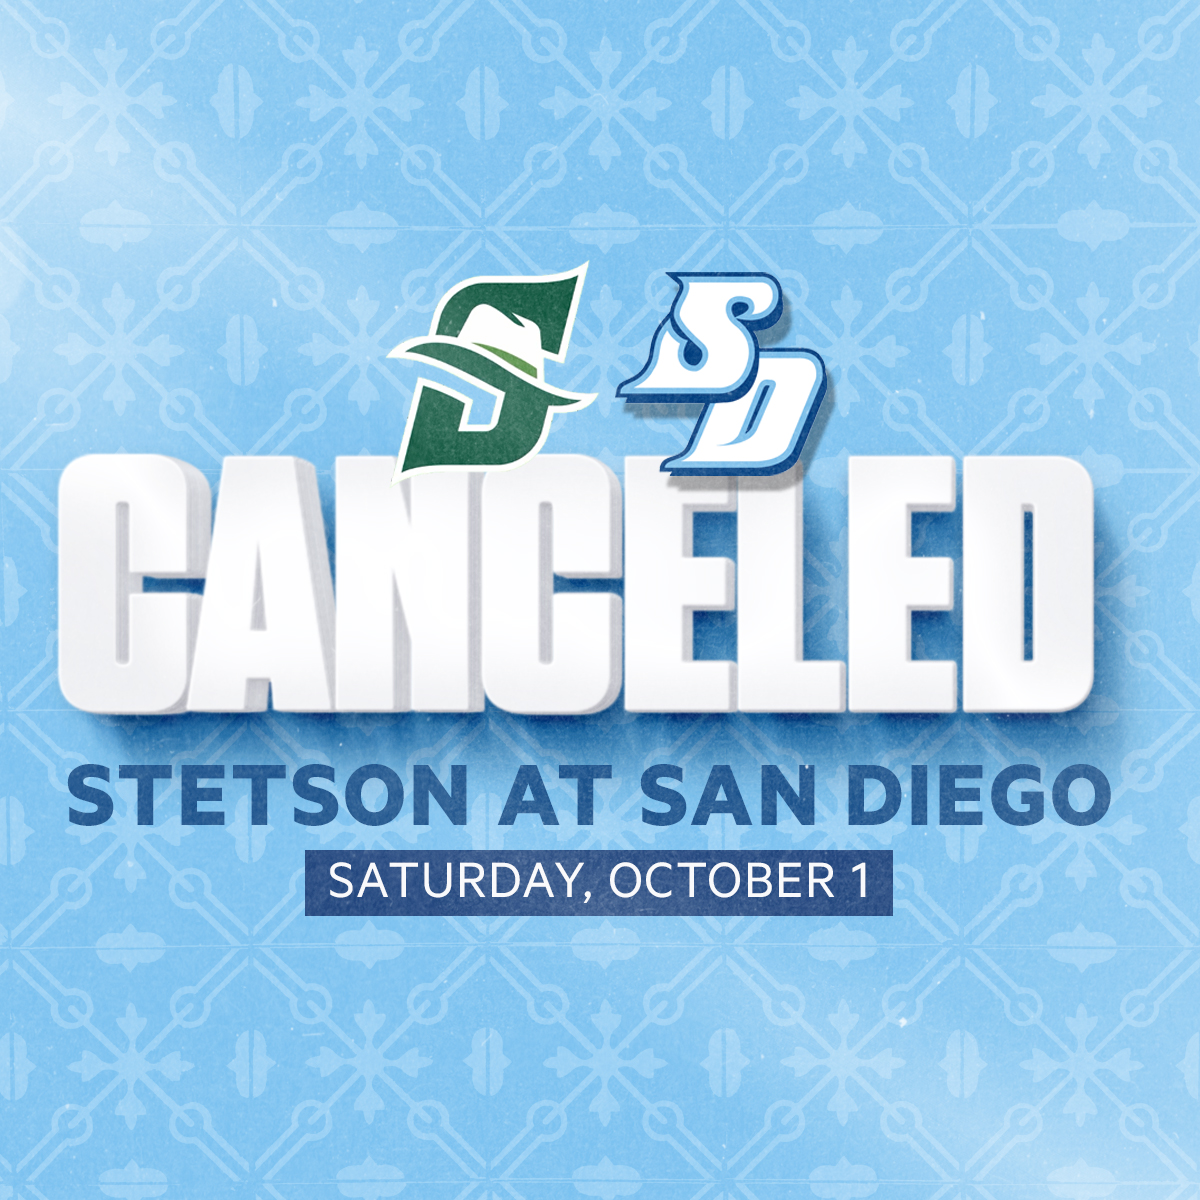 Due to circumstances caused by Hurricane Ian, our home game against @StetsonFootball this Saturday has been canceled. Stay tuned to our social media accounts and usdtoreros.com for updates.